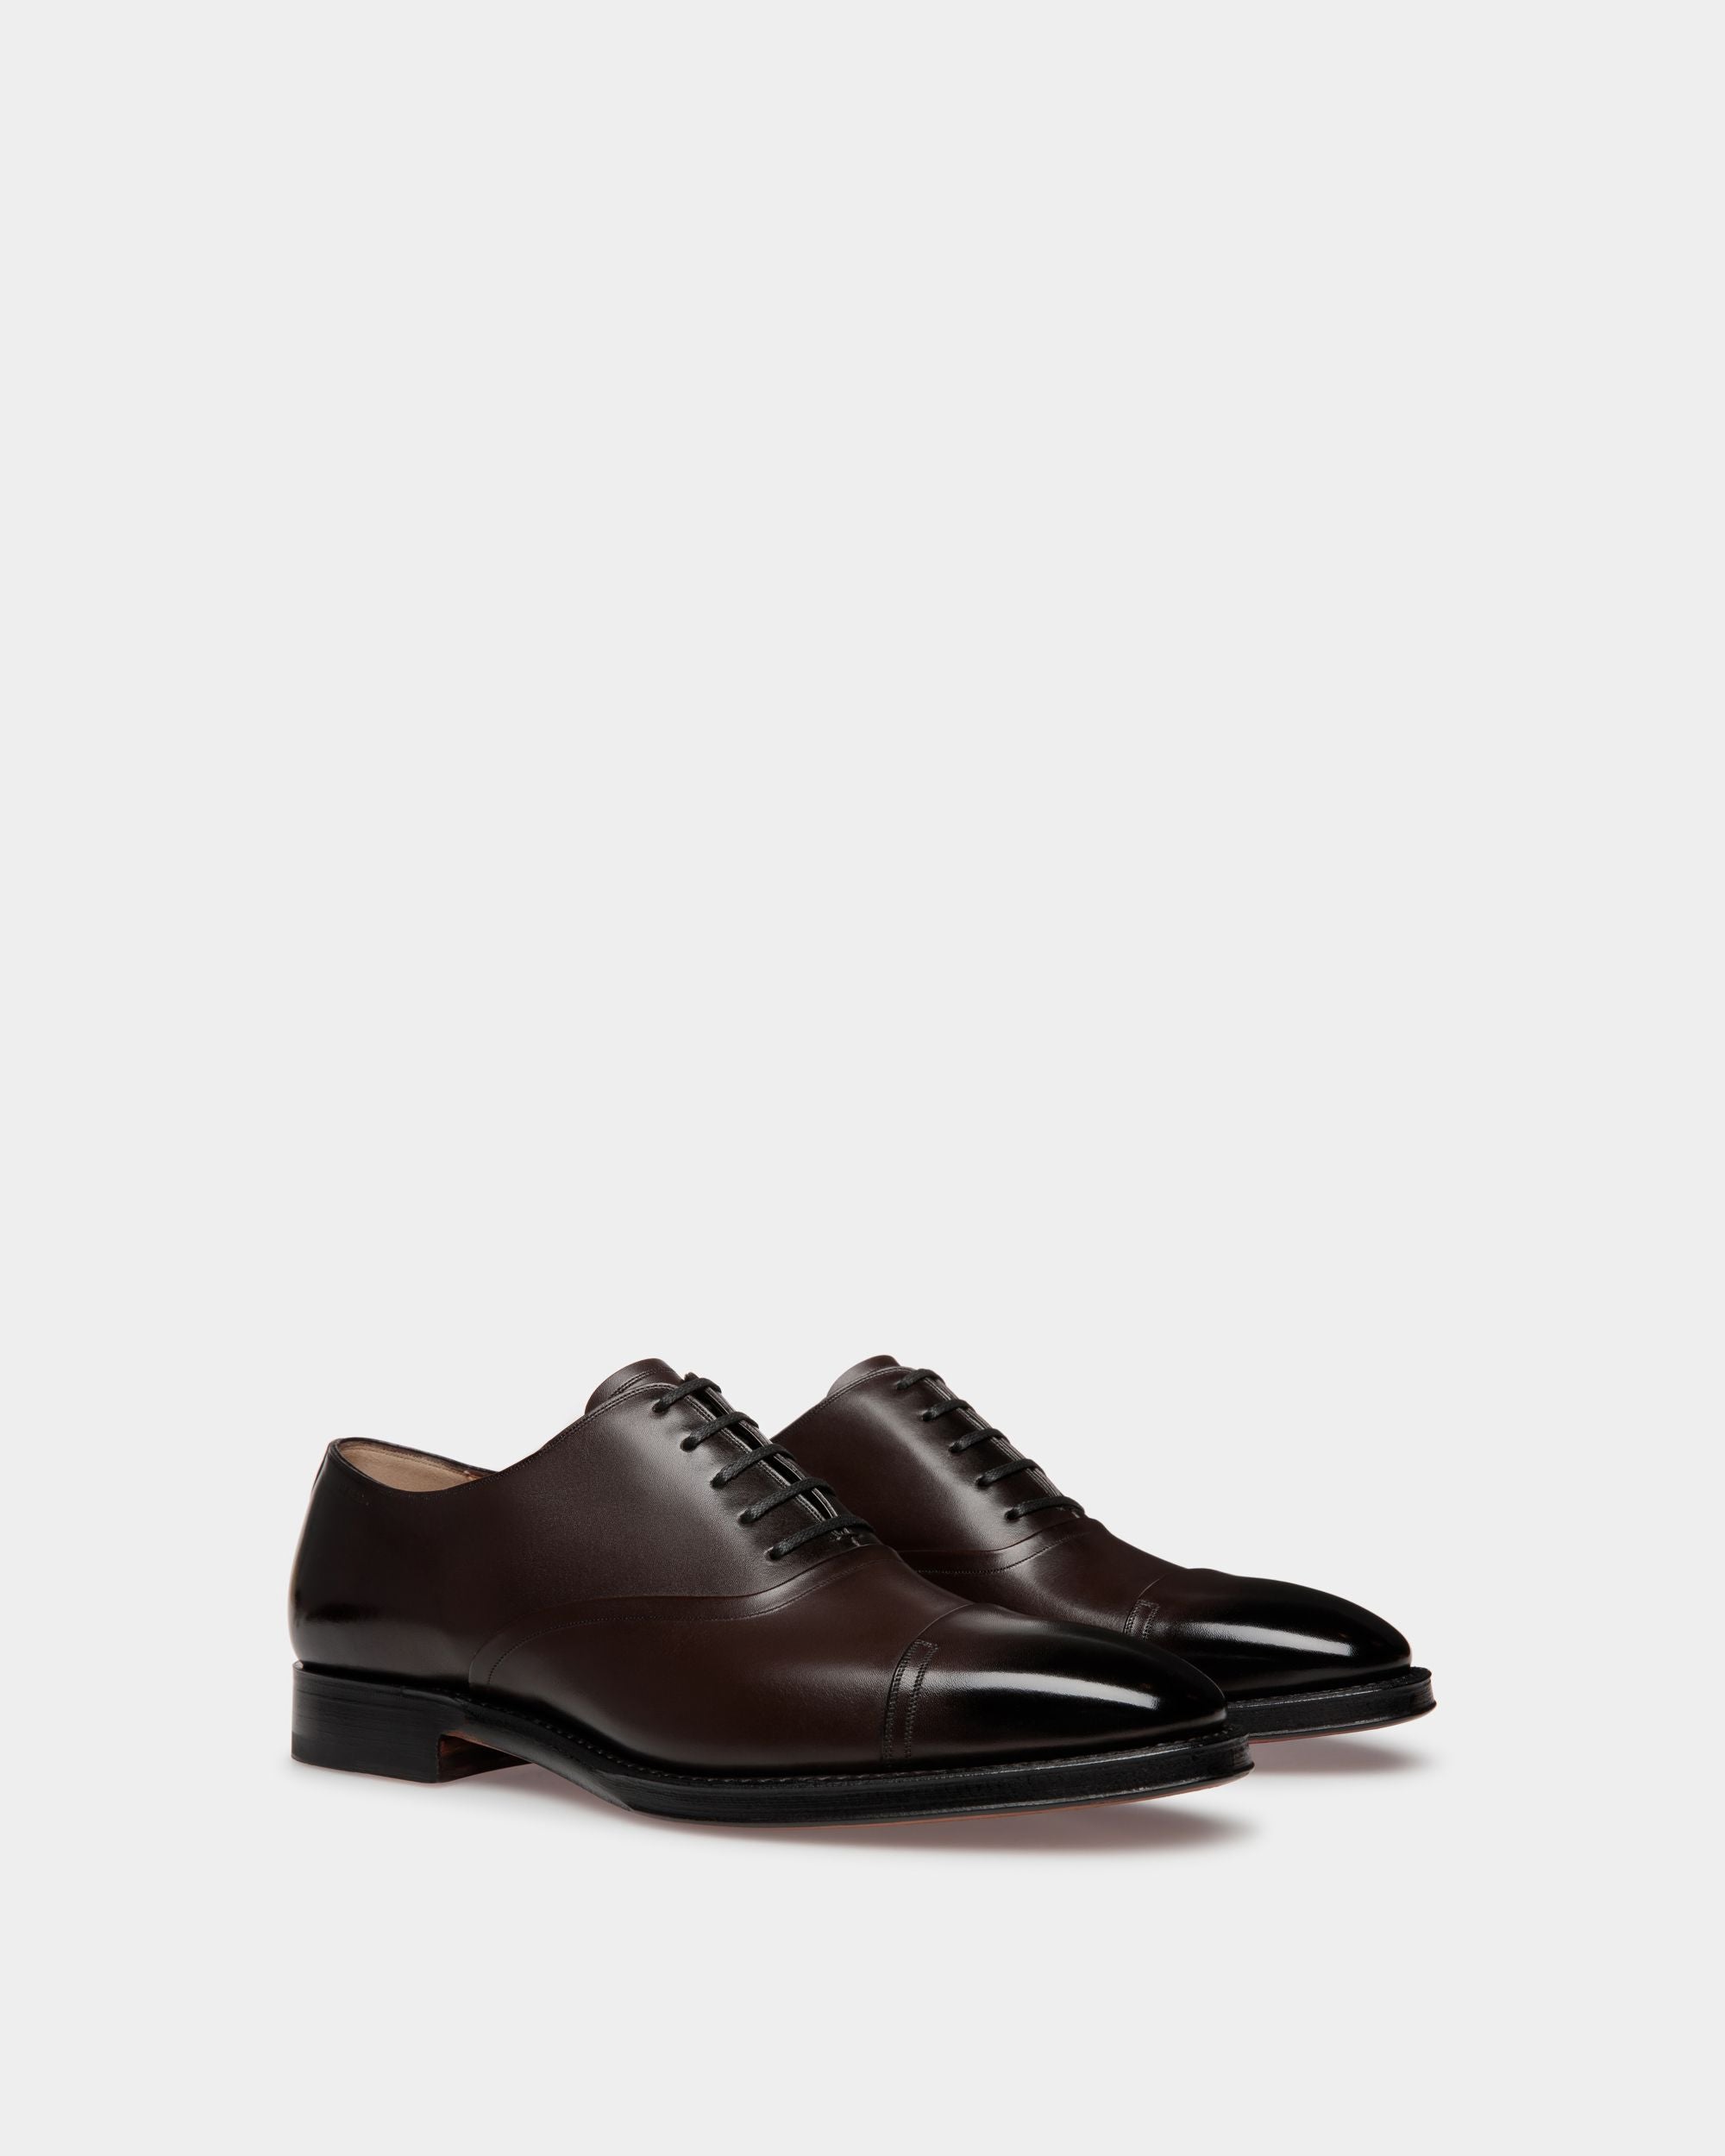 Selby | Men's Oxford Shoes | Brown Leather | Bally | Still Life 3/4 Front